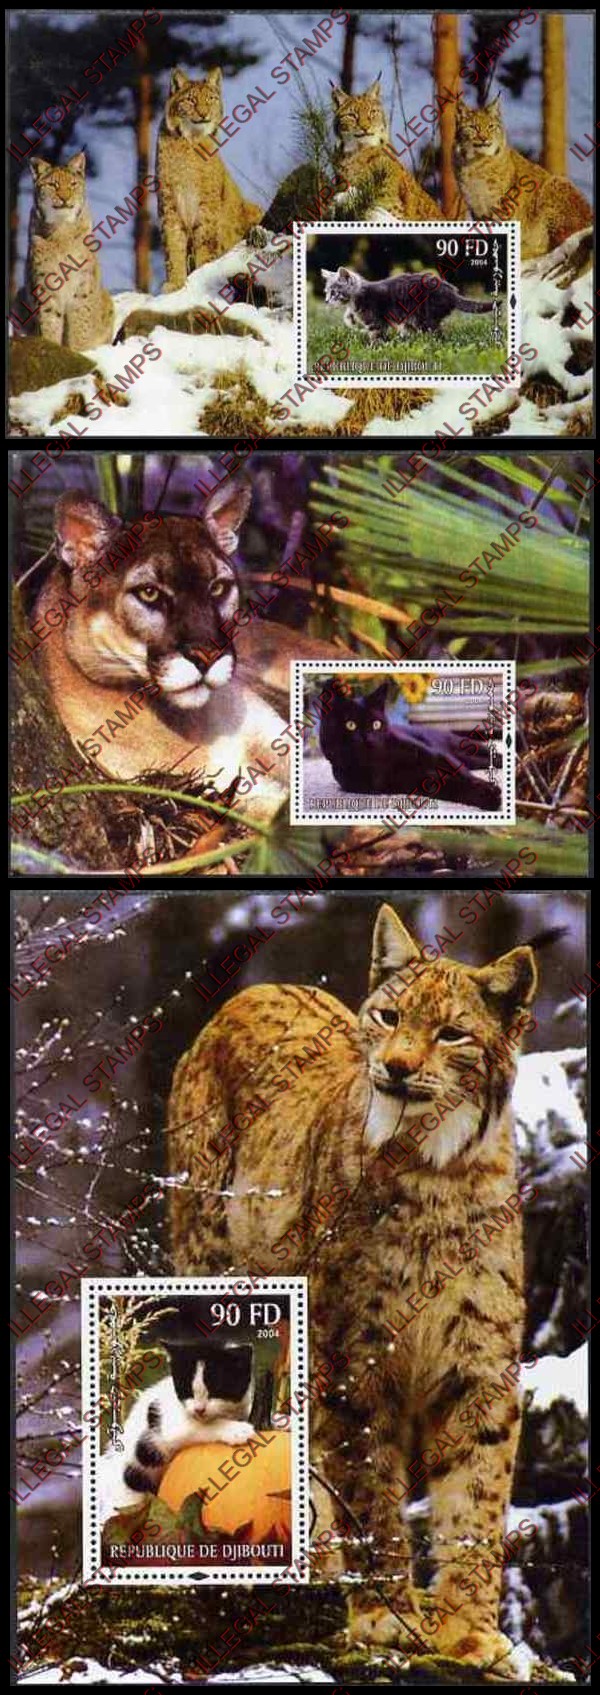 Djibouti 2004 Cats Illegal Stamp Souvenir Sheets of 1